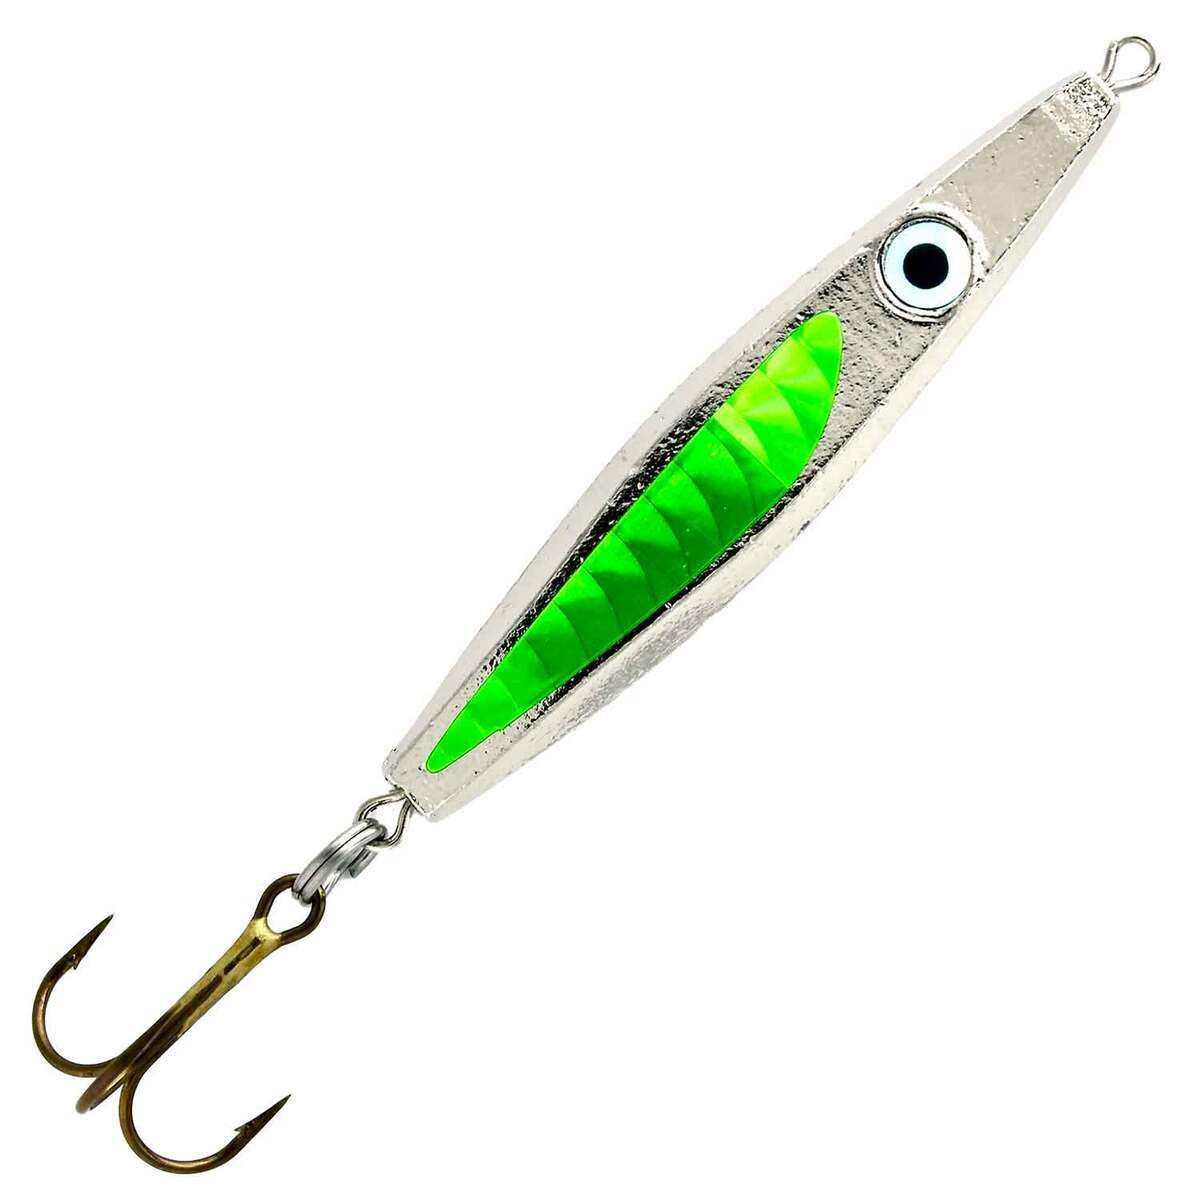 Mission Lures EJ Jigging Spoon - Emerald Shinner, 1oz, 3-1/10in